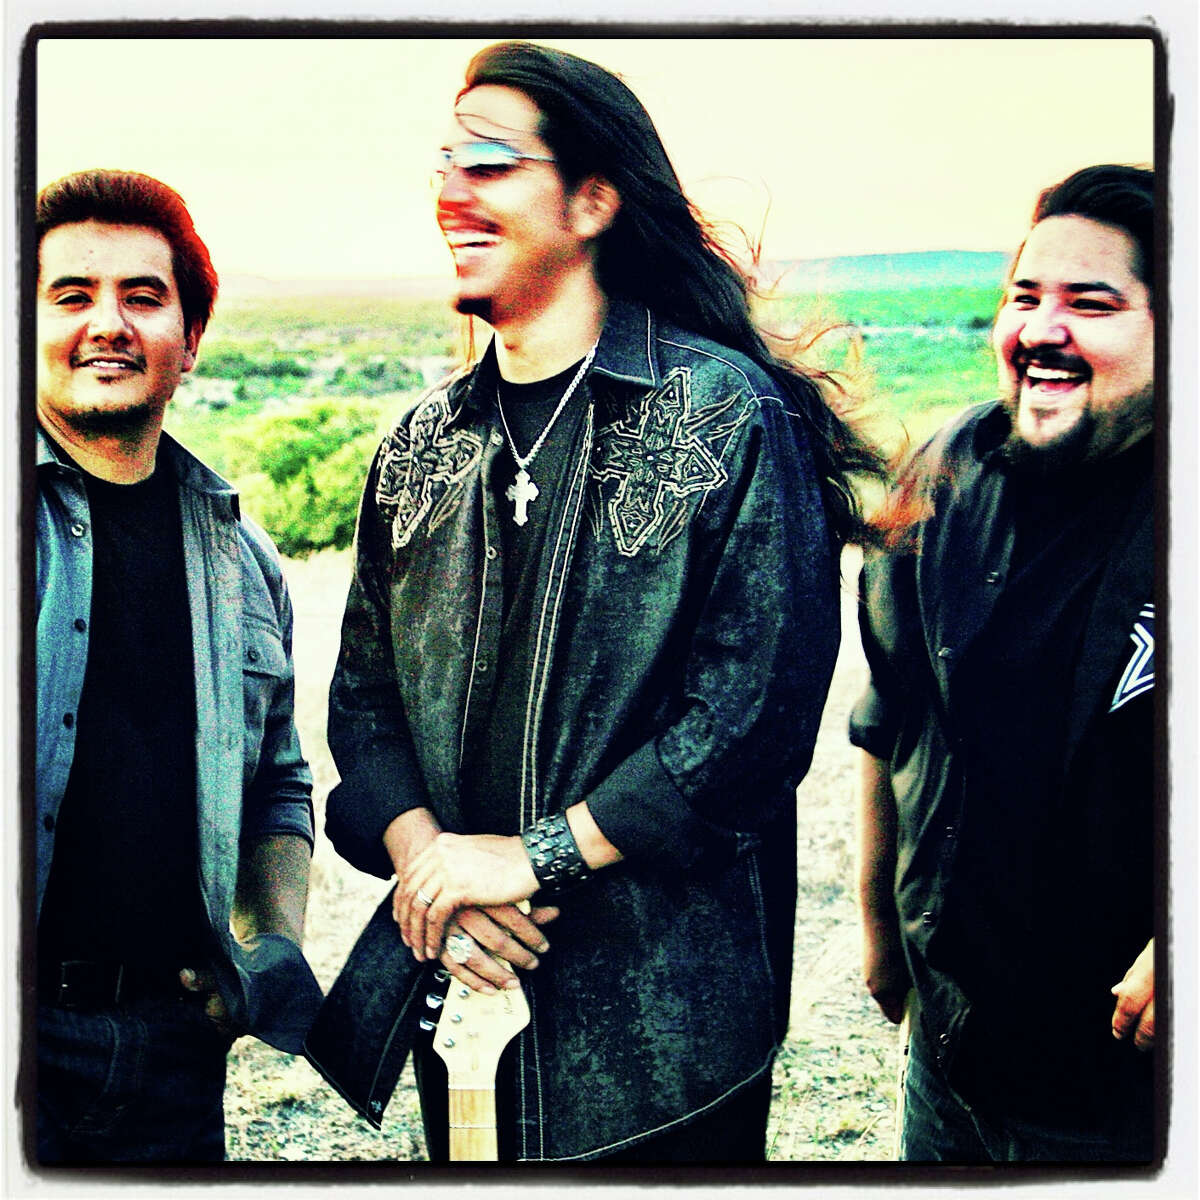 Los Lonely Boys, American rock power trio from San Angelo, Texas. They play a style of music they call "Texican Rock n' Roll," combining elements of rock and roll, Texas blues, brown eyed soul, country, and Tejano.